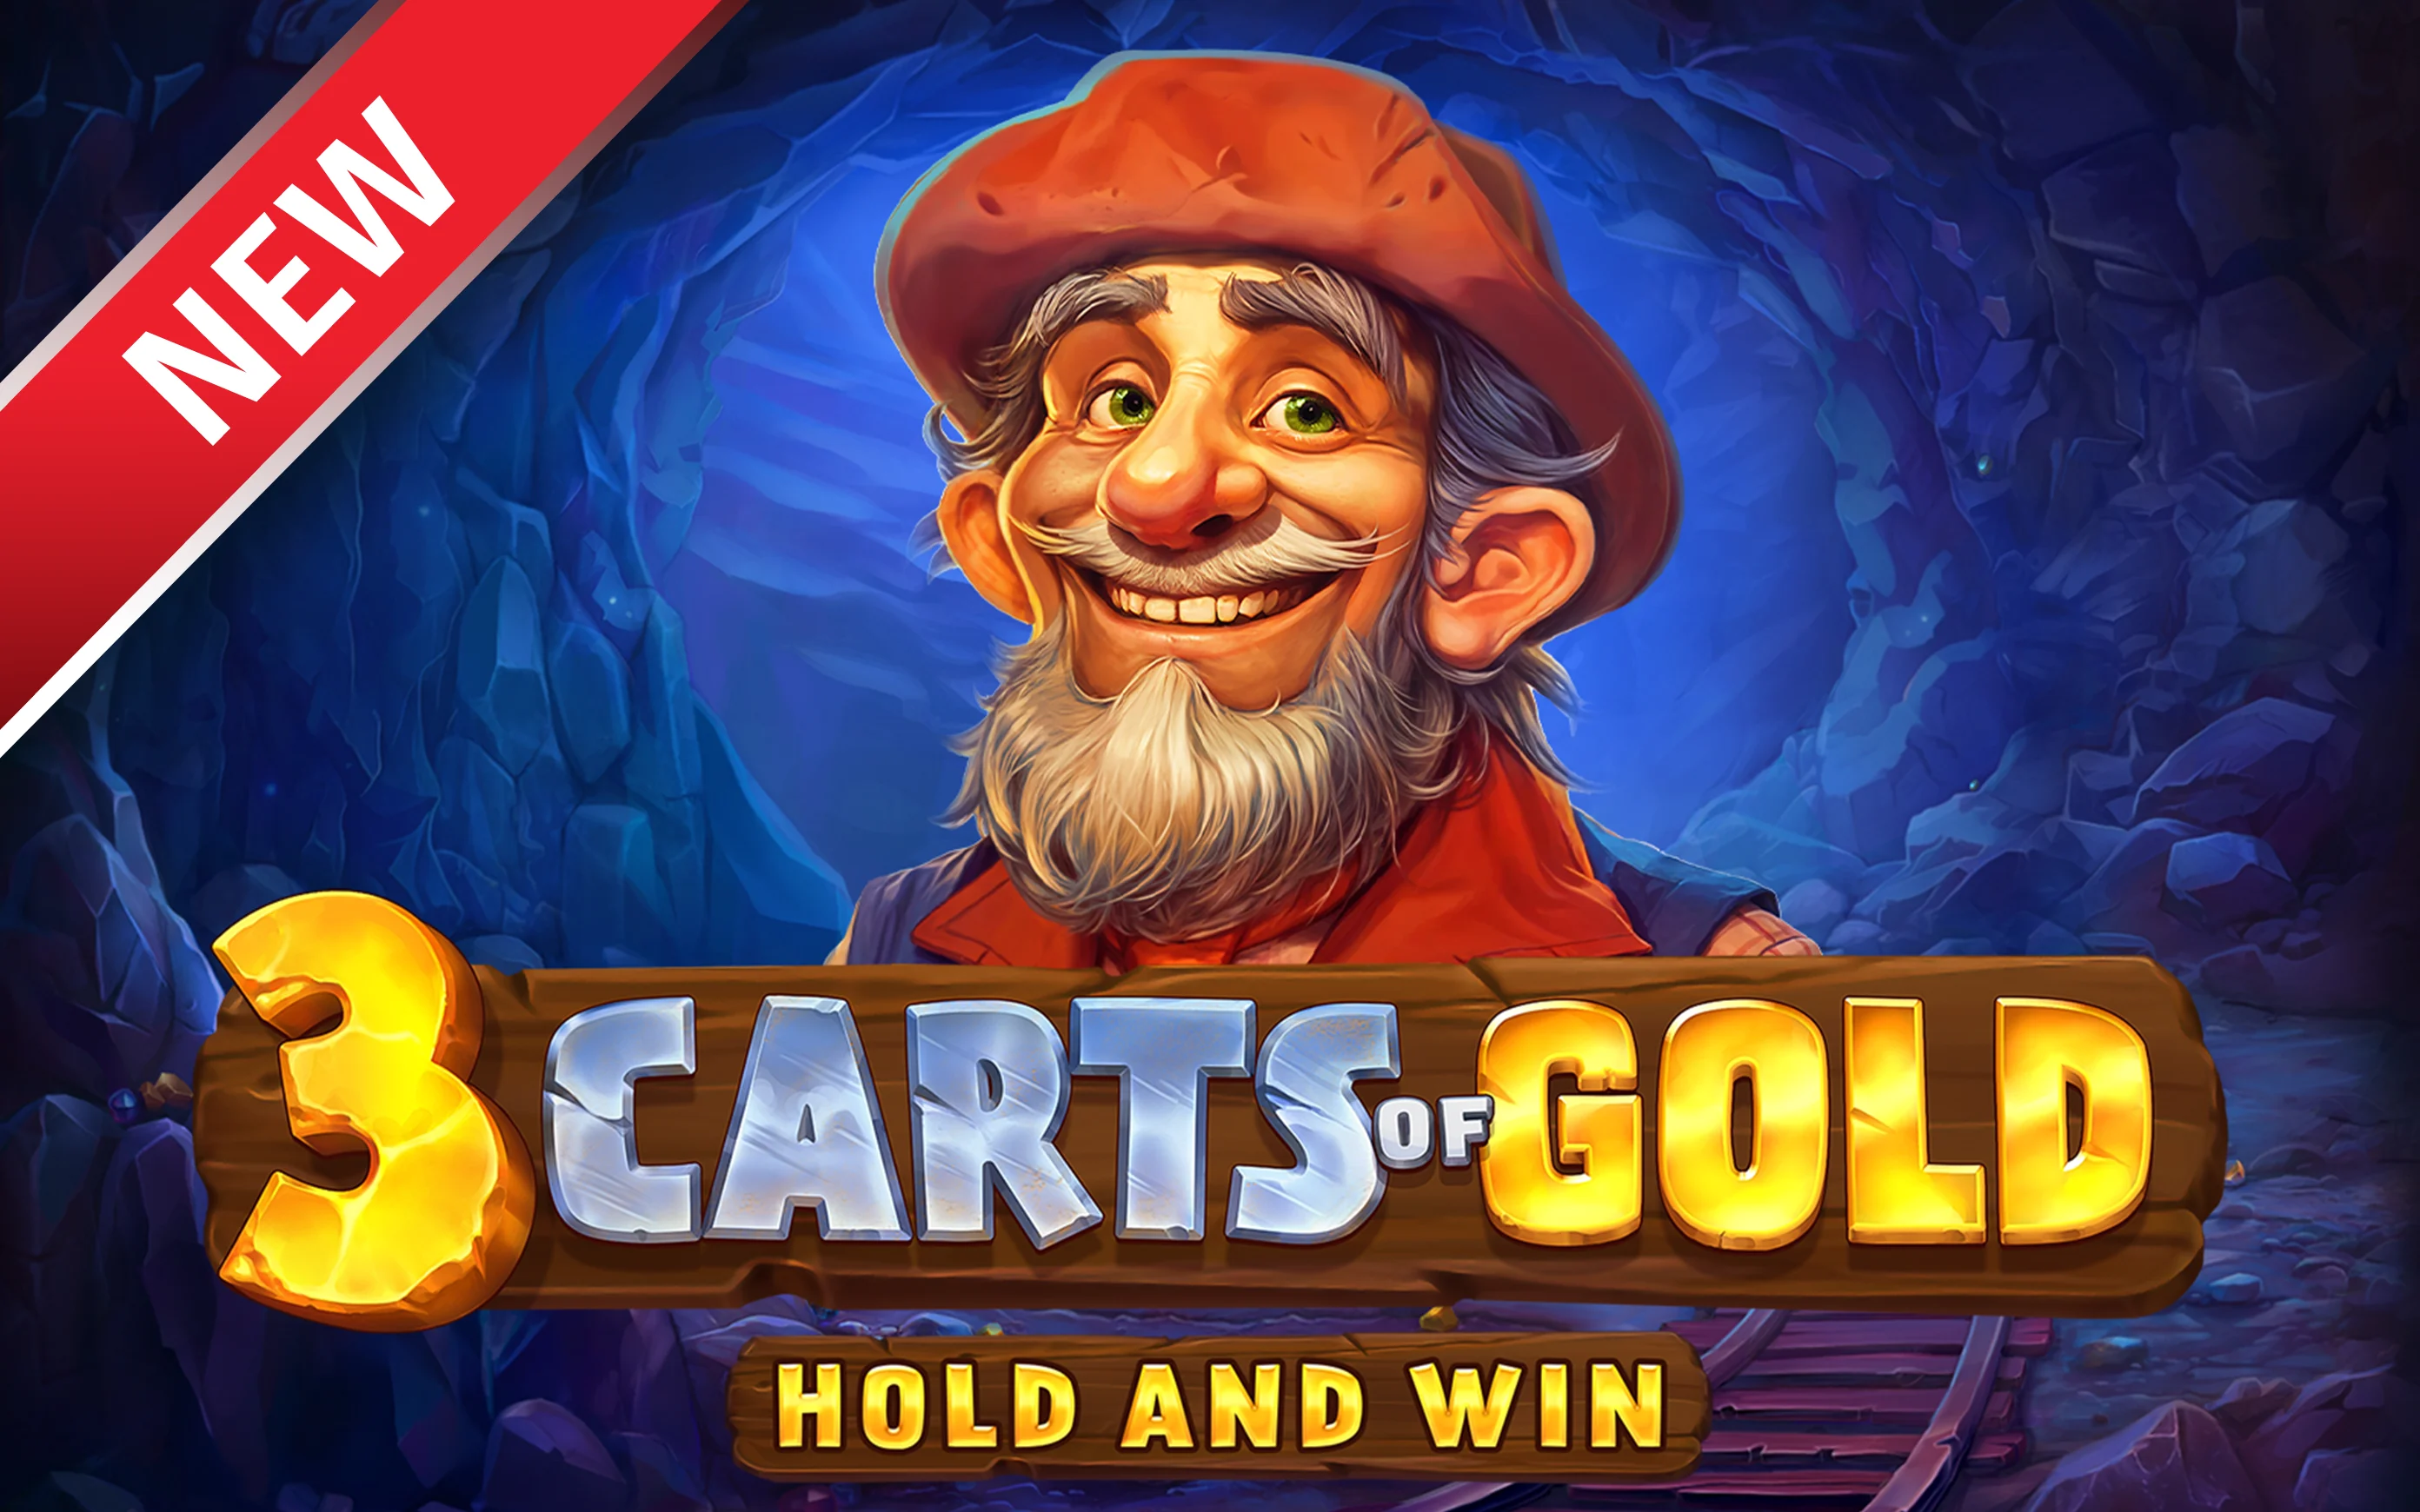 Spil 3 Carts of Gold: Hold and Win på Starcasino.be online kasino
